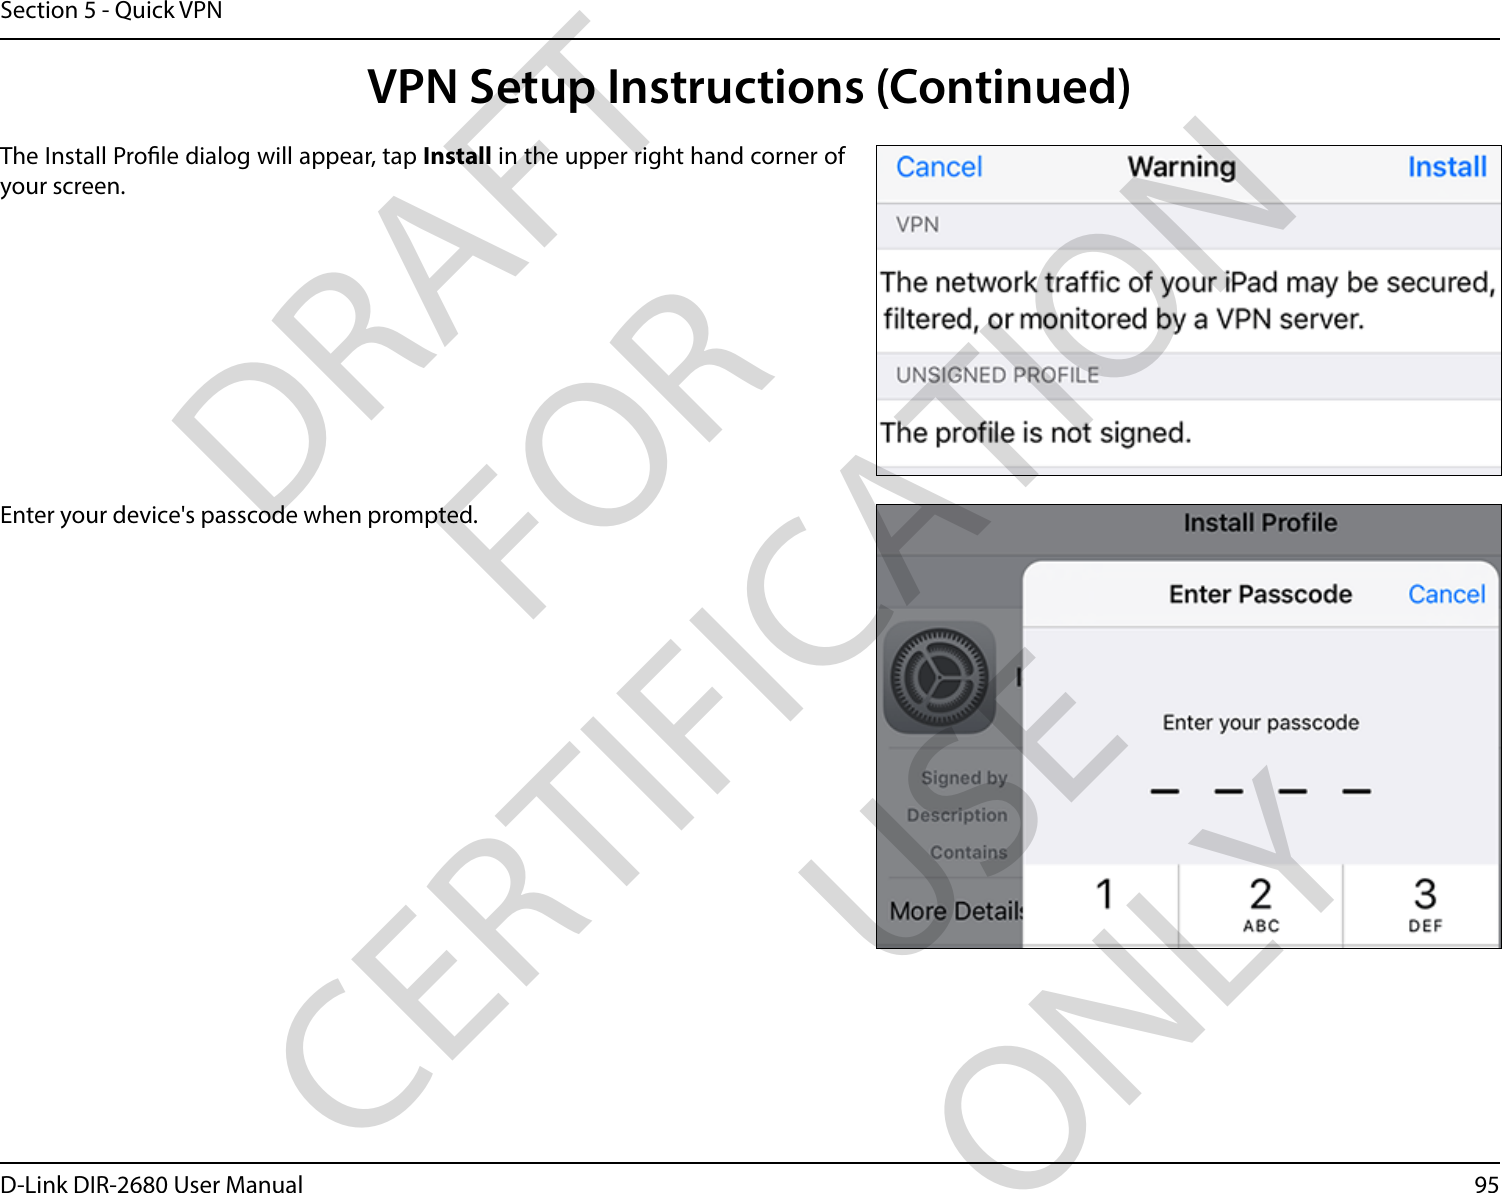 95D-Link DIR-2680 User ManualSection 5 - Quick VPNThe Install Prole dialog will appear, tap Install in the upper right hand corner of your screen.Enter your device&apos;s passcode when prompted. VPN Setup Instructions (Continued)DRAFT FOR CERTIFICATION USE ONLY